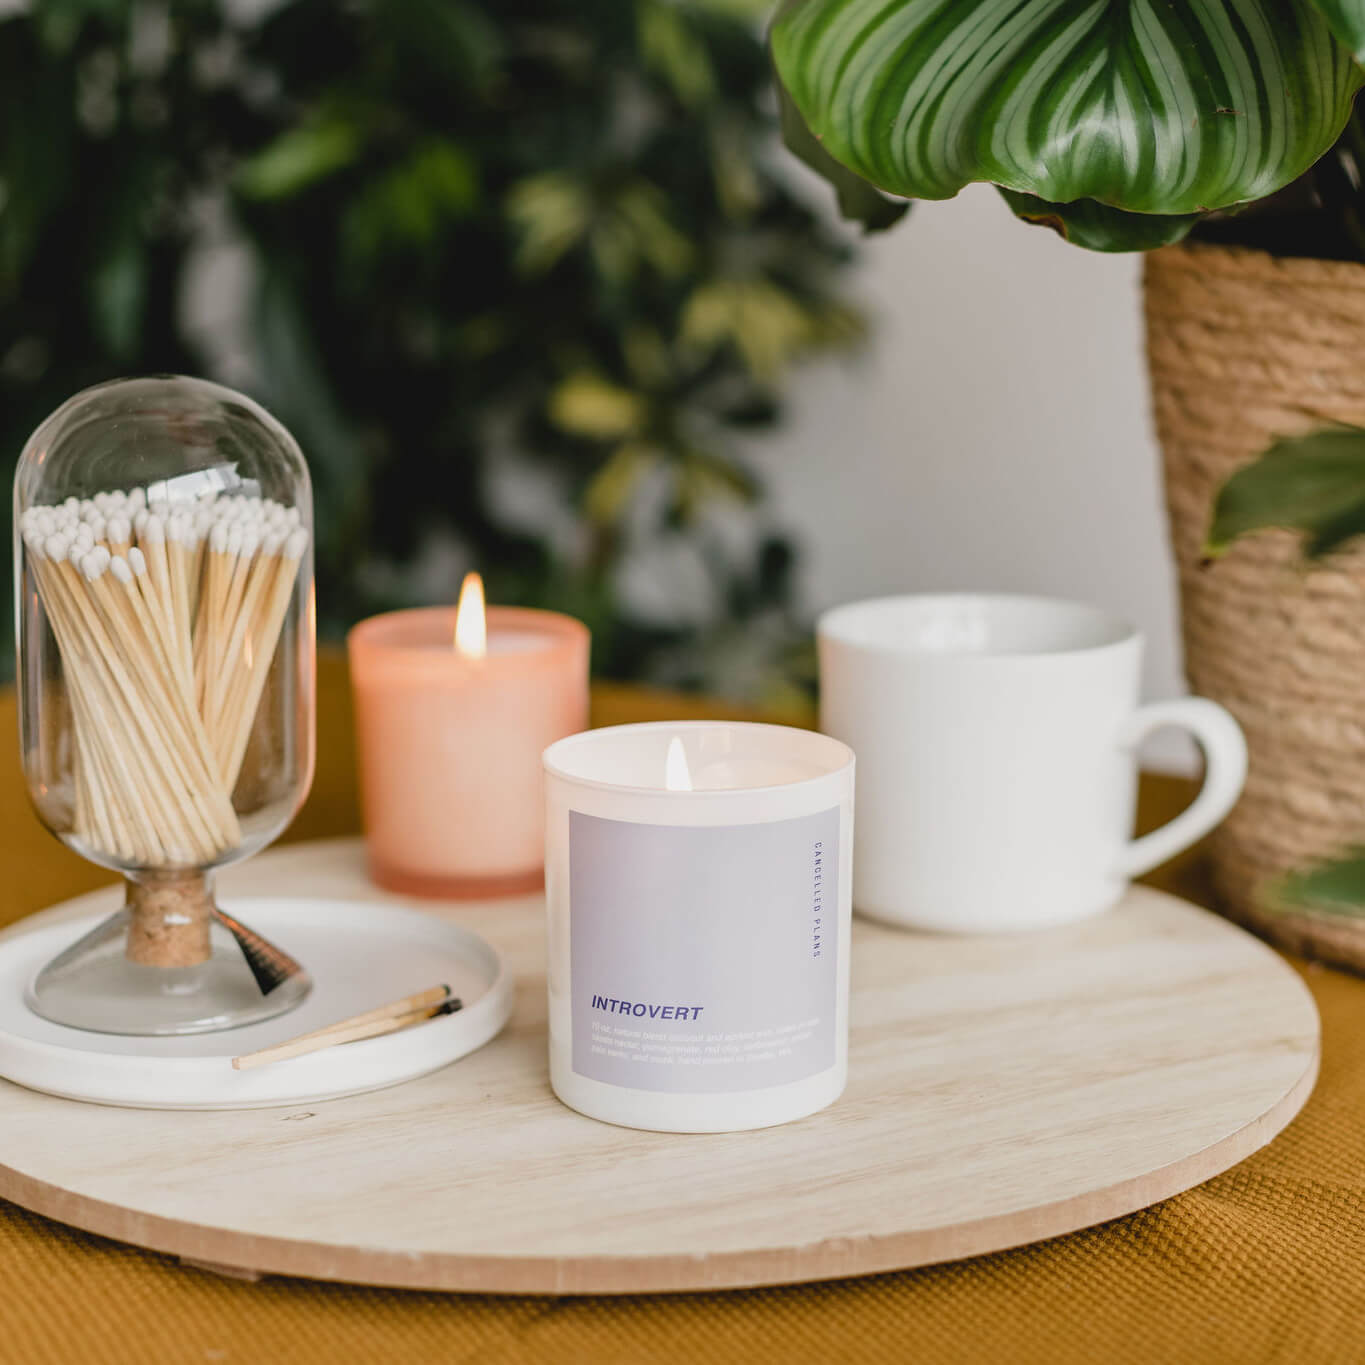 Introvert Scented Candle by Cancelled Plans